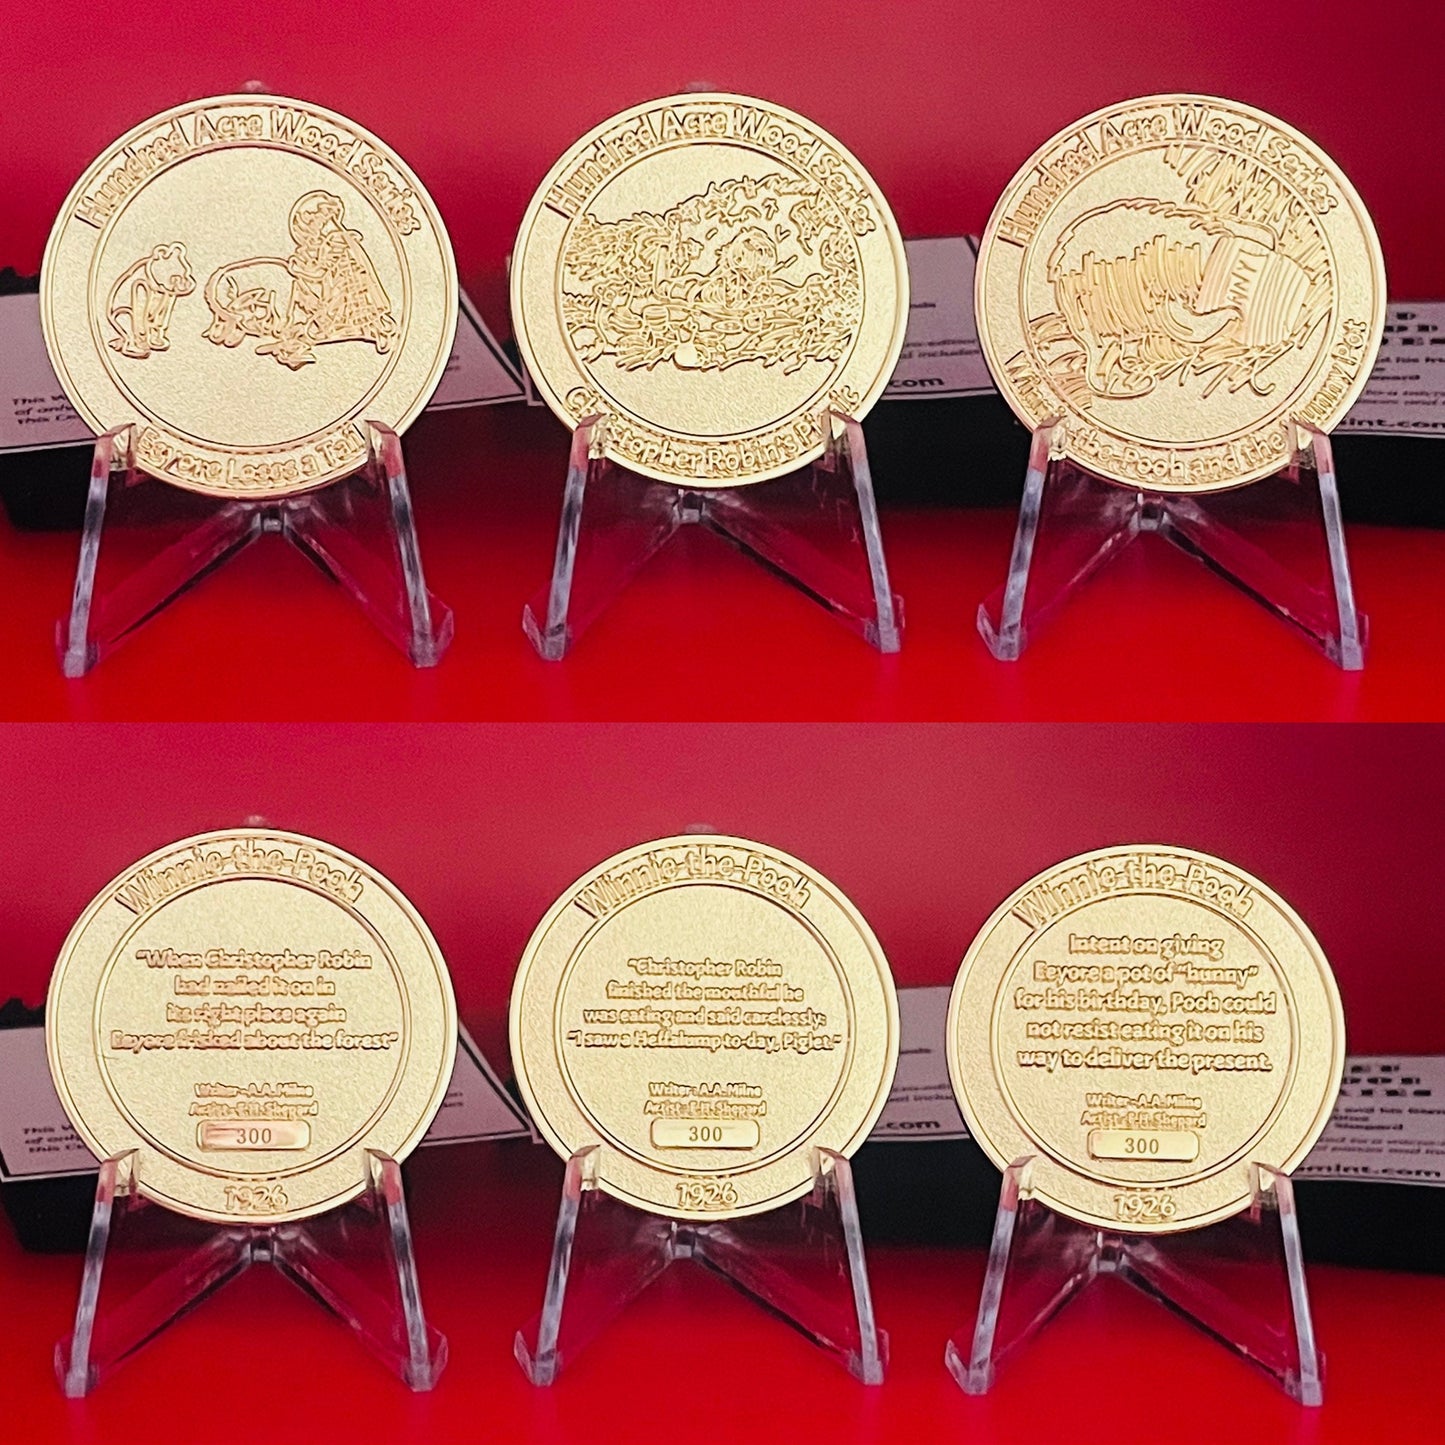 2. The Hundred Acre Wood 3 Coin Set Featuring Winnie-The-Pooh